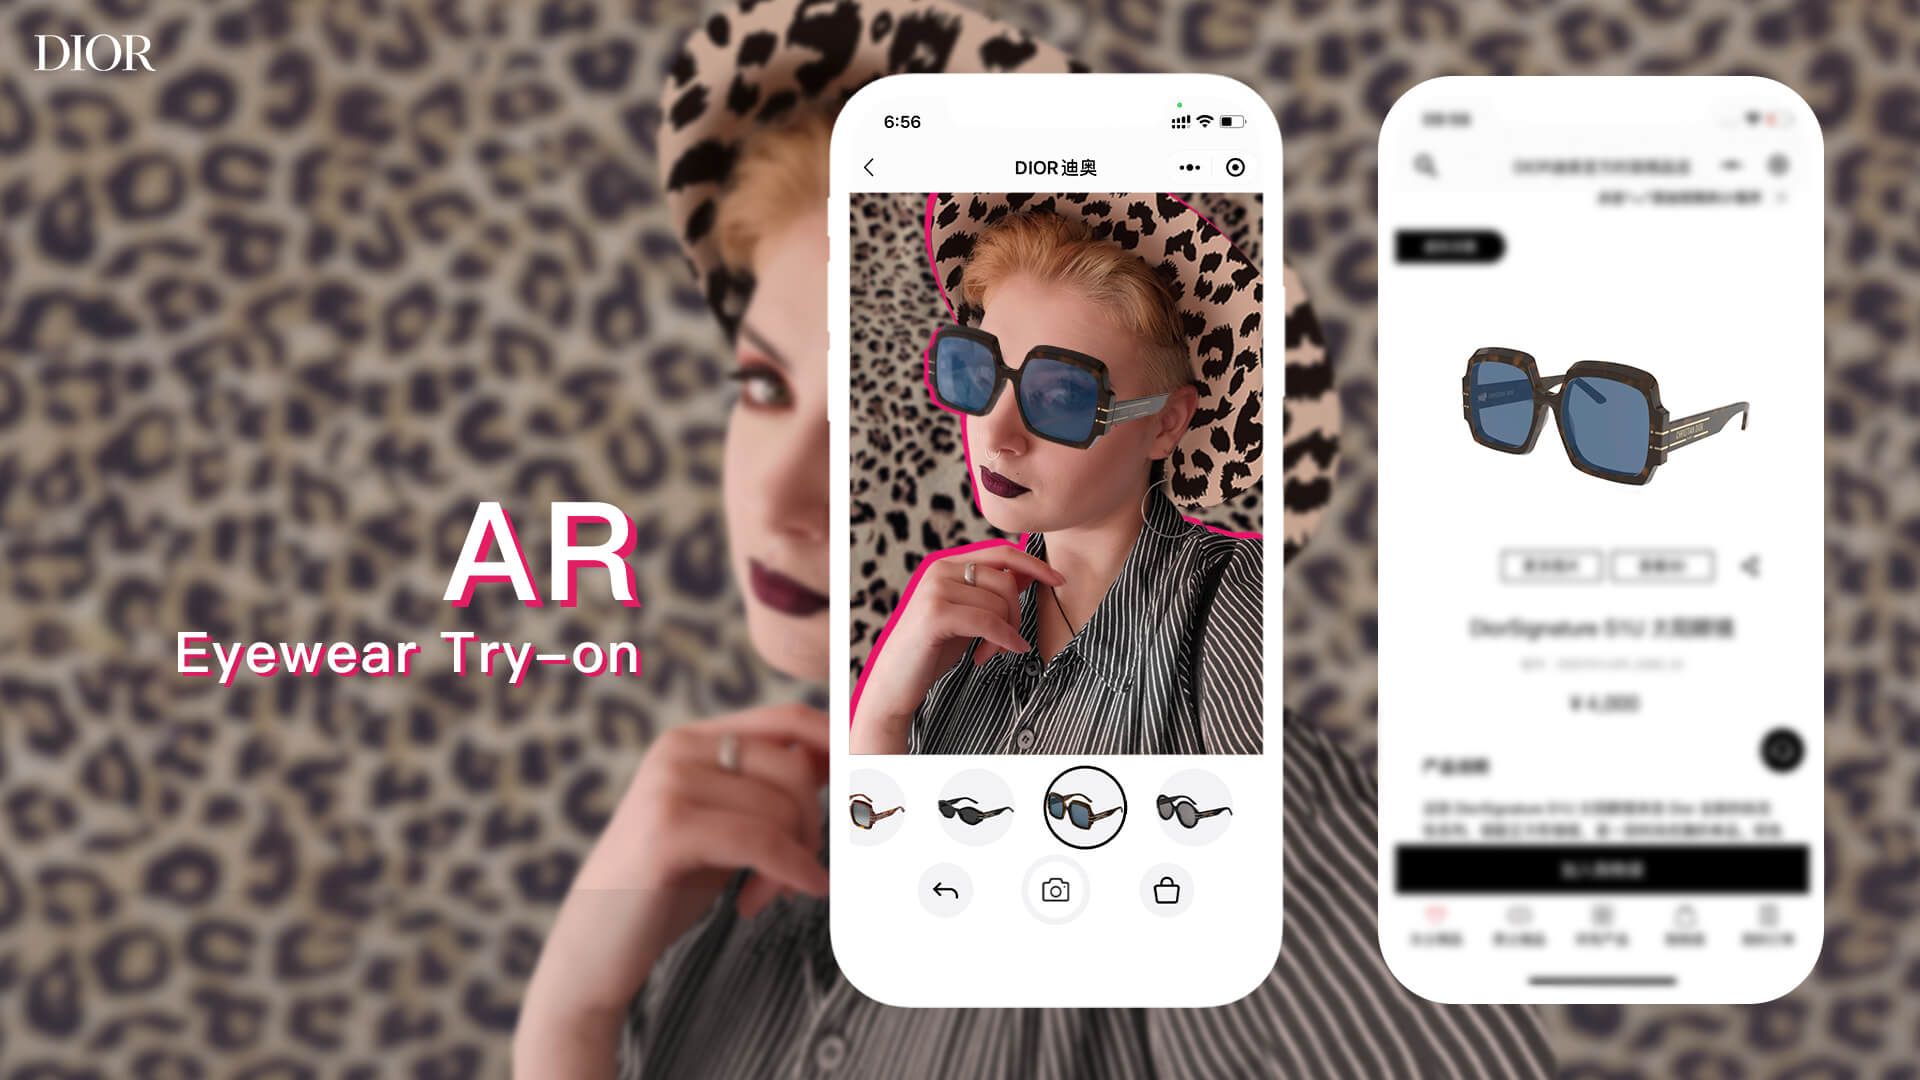 Dior Eyewear AR Try-on – Growth Hacks for E-commerce